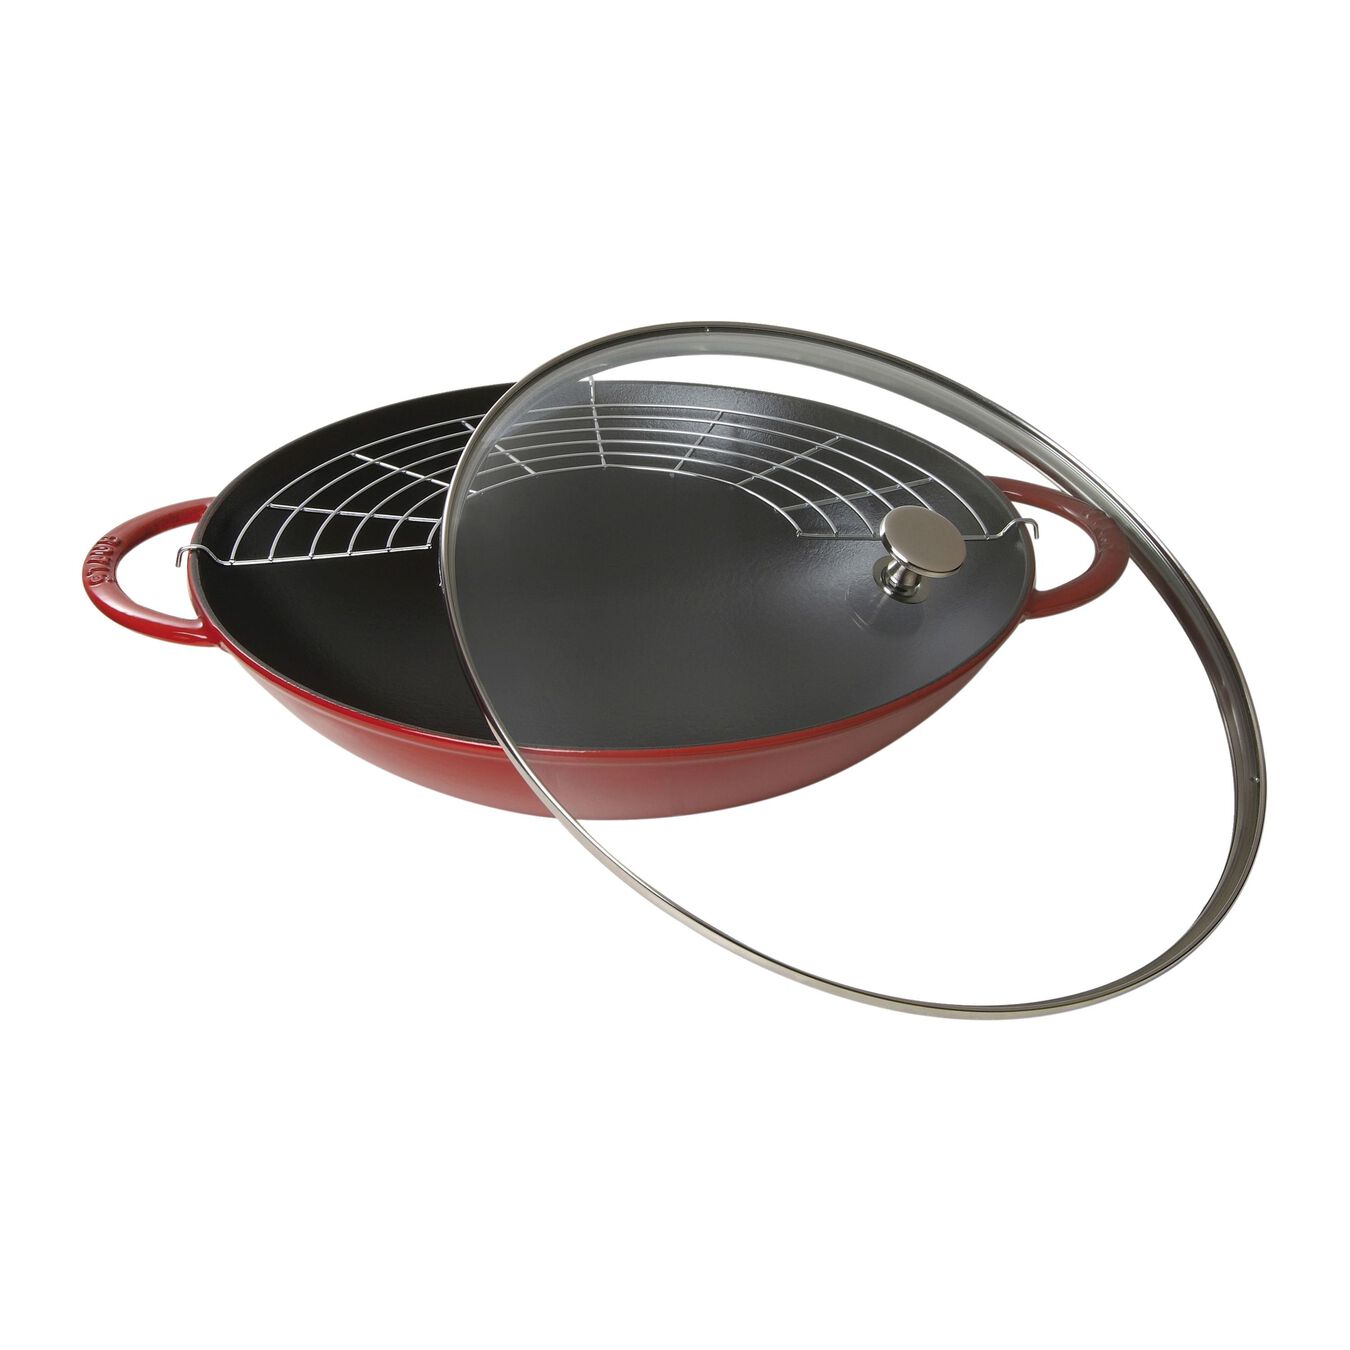 37 cm / 14.5 inch cast iron Wok with glass lid, cherry - Visual Imperfections,,large 1